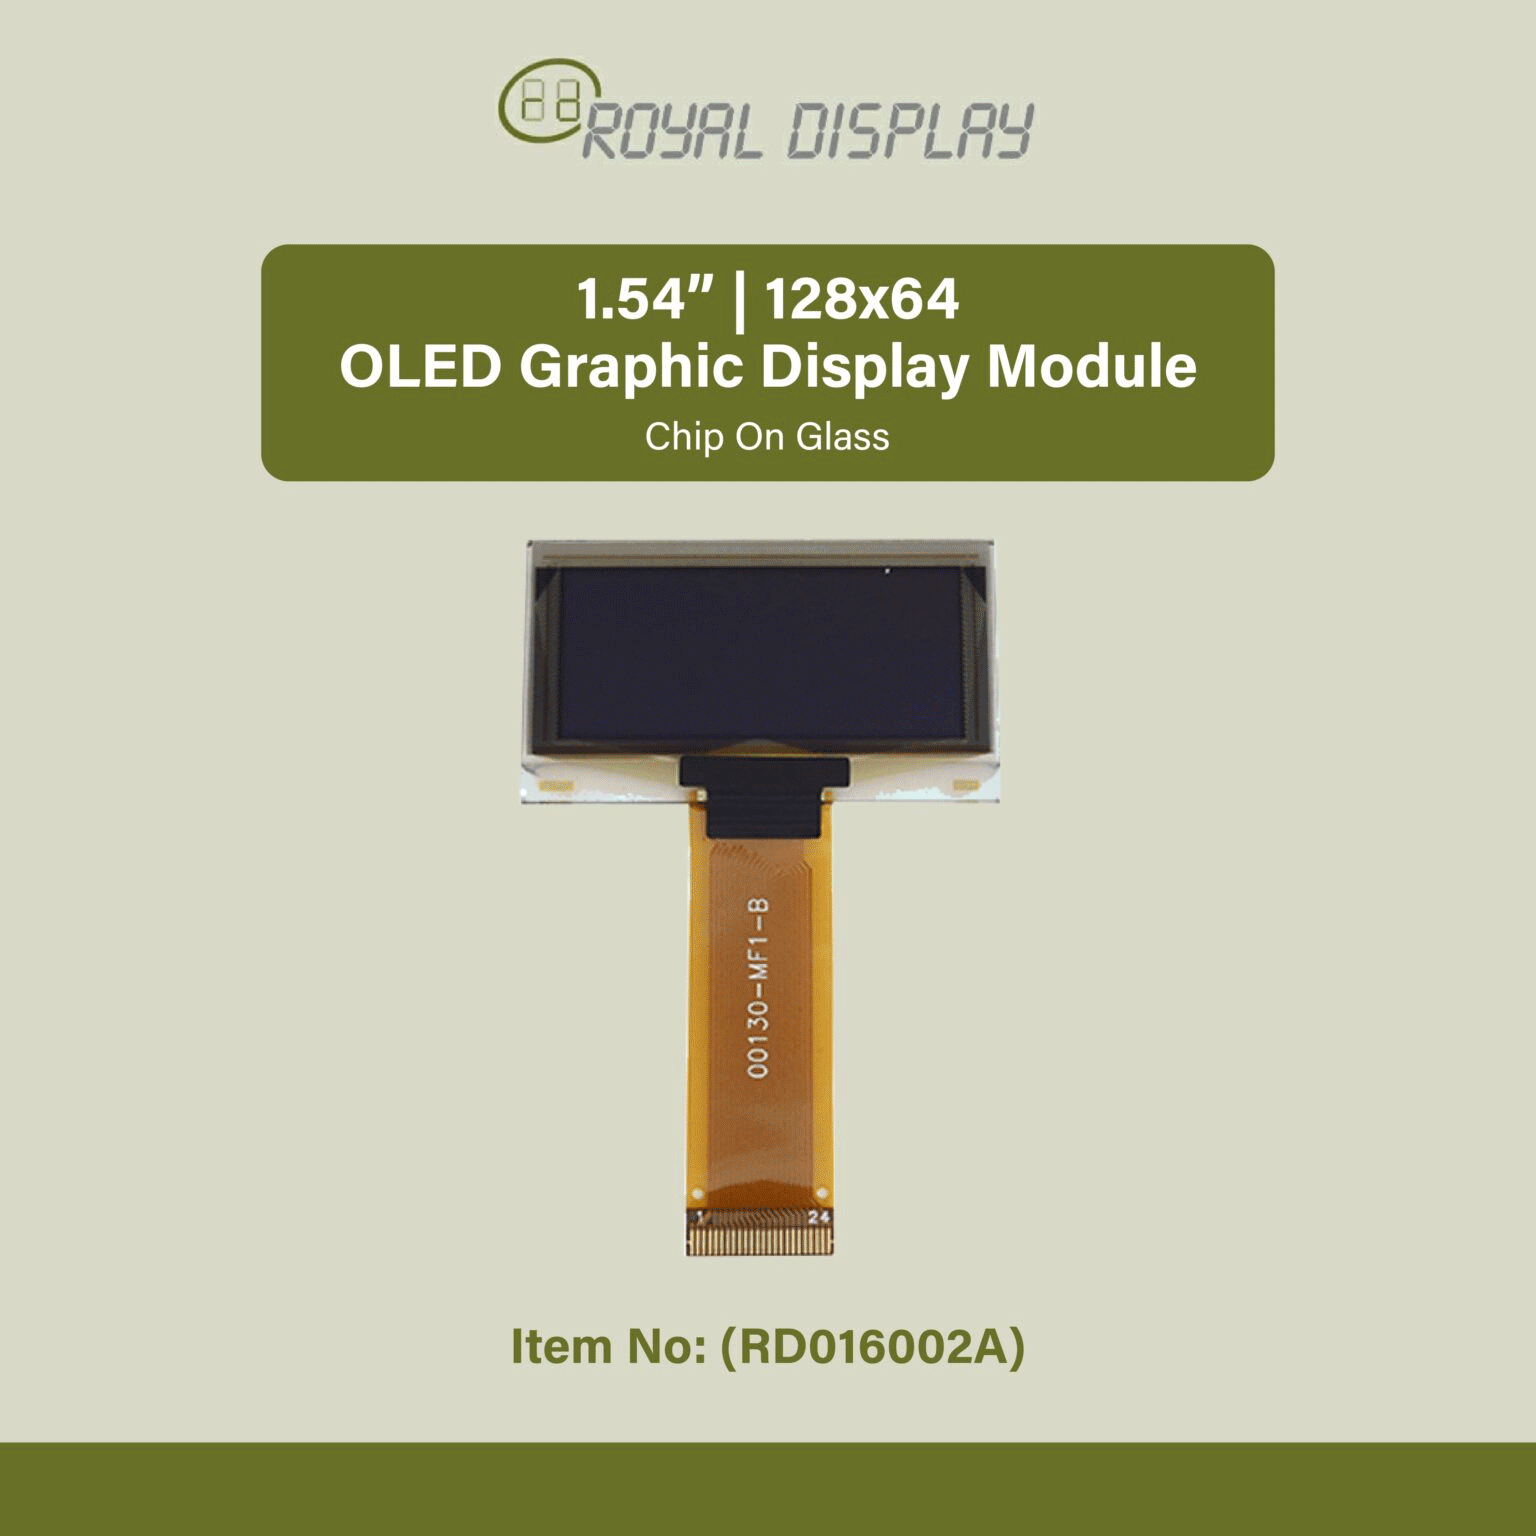 OLED Graphic Display Modules